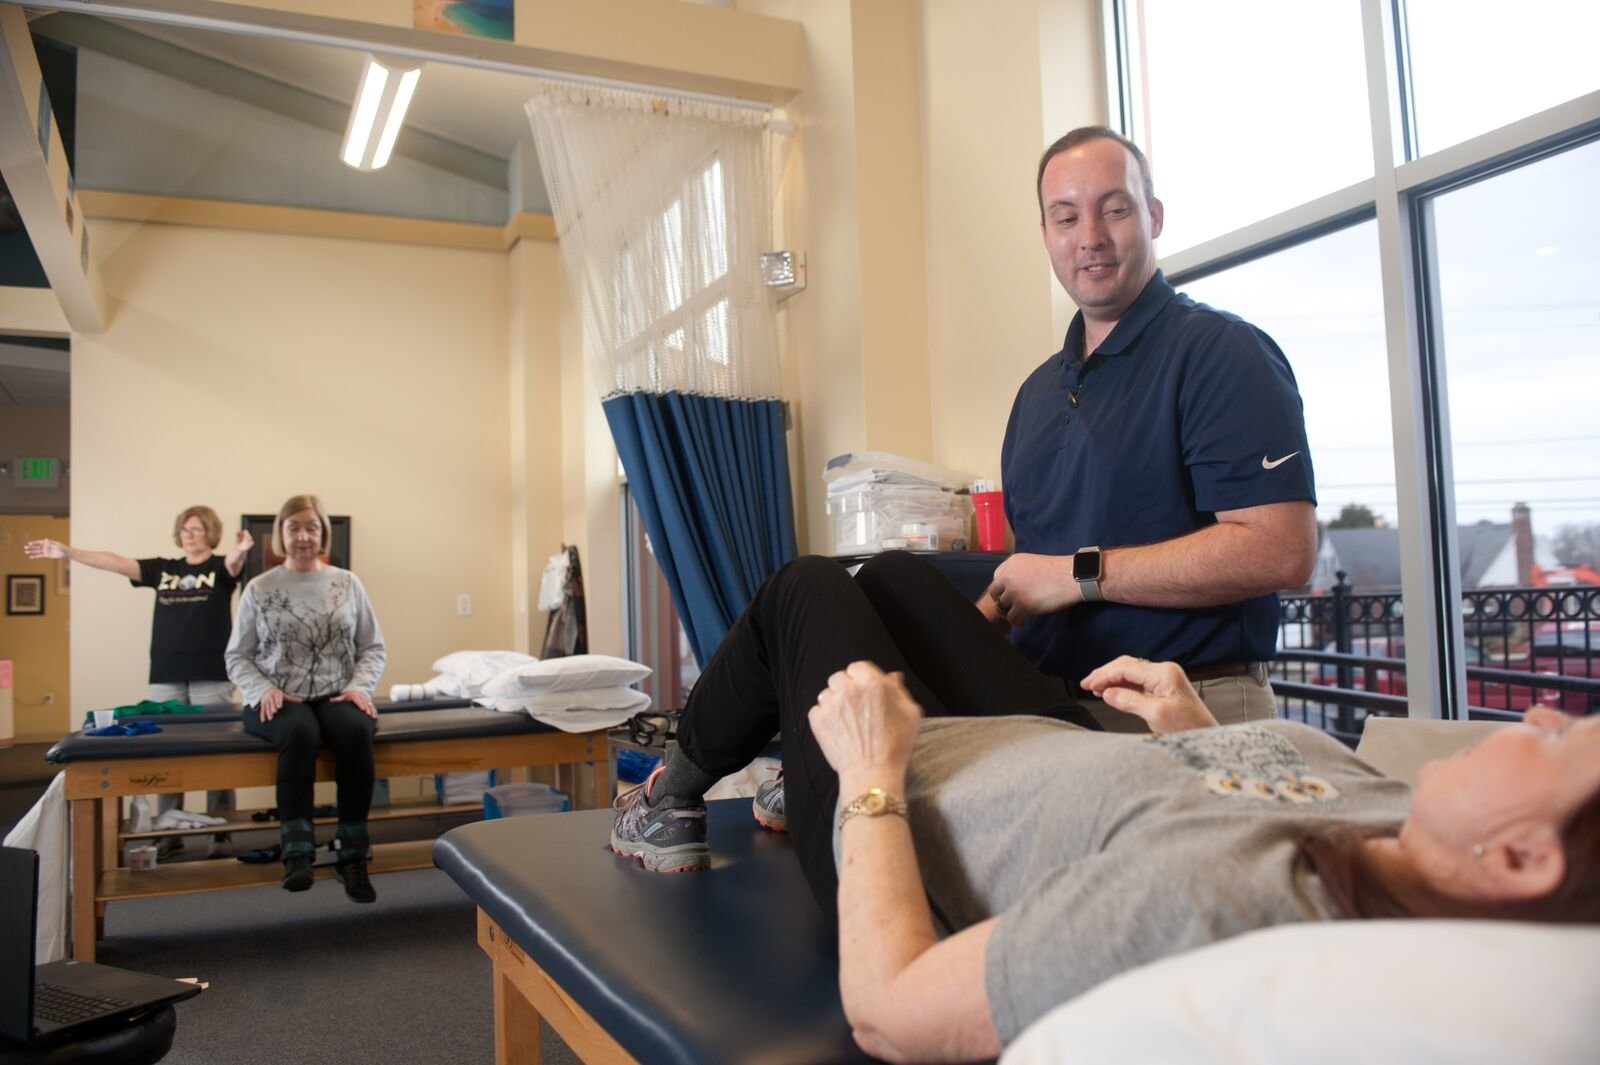 physical therapist Phillip with a patient and 2 other patients in background